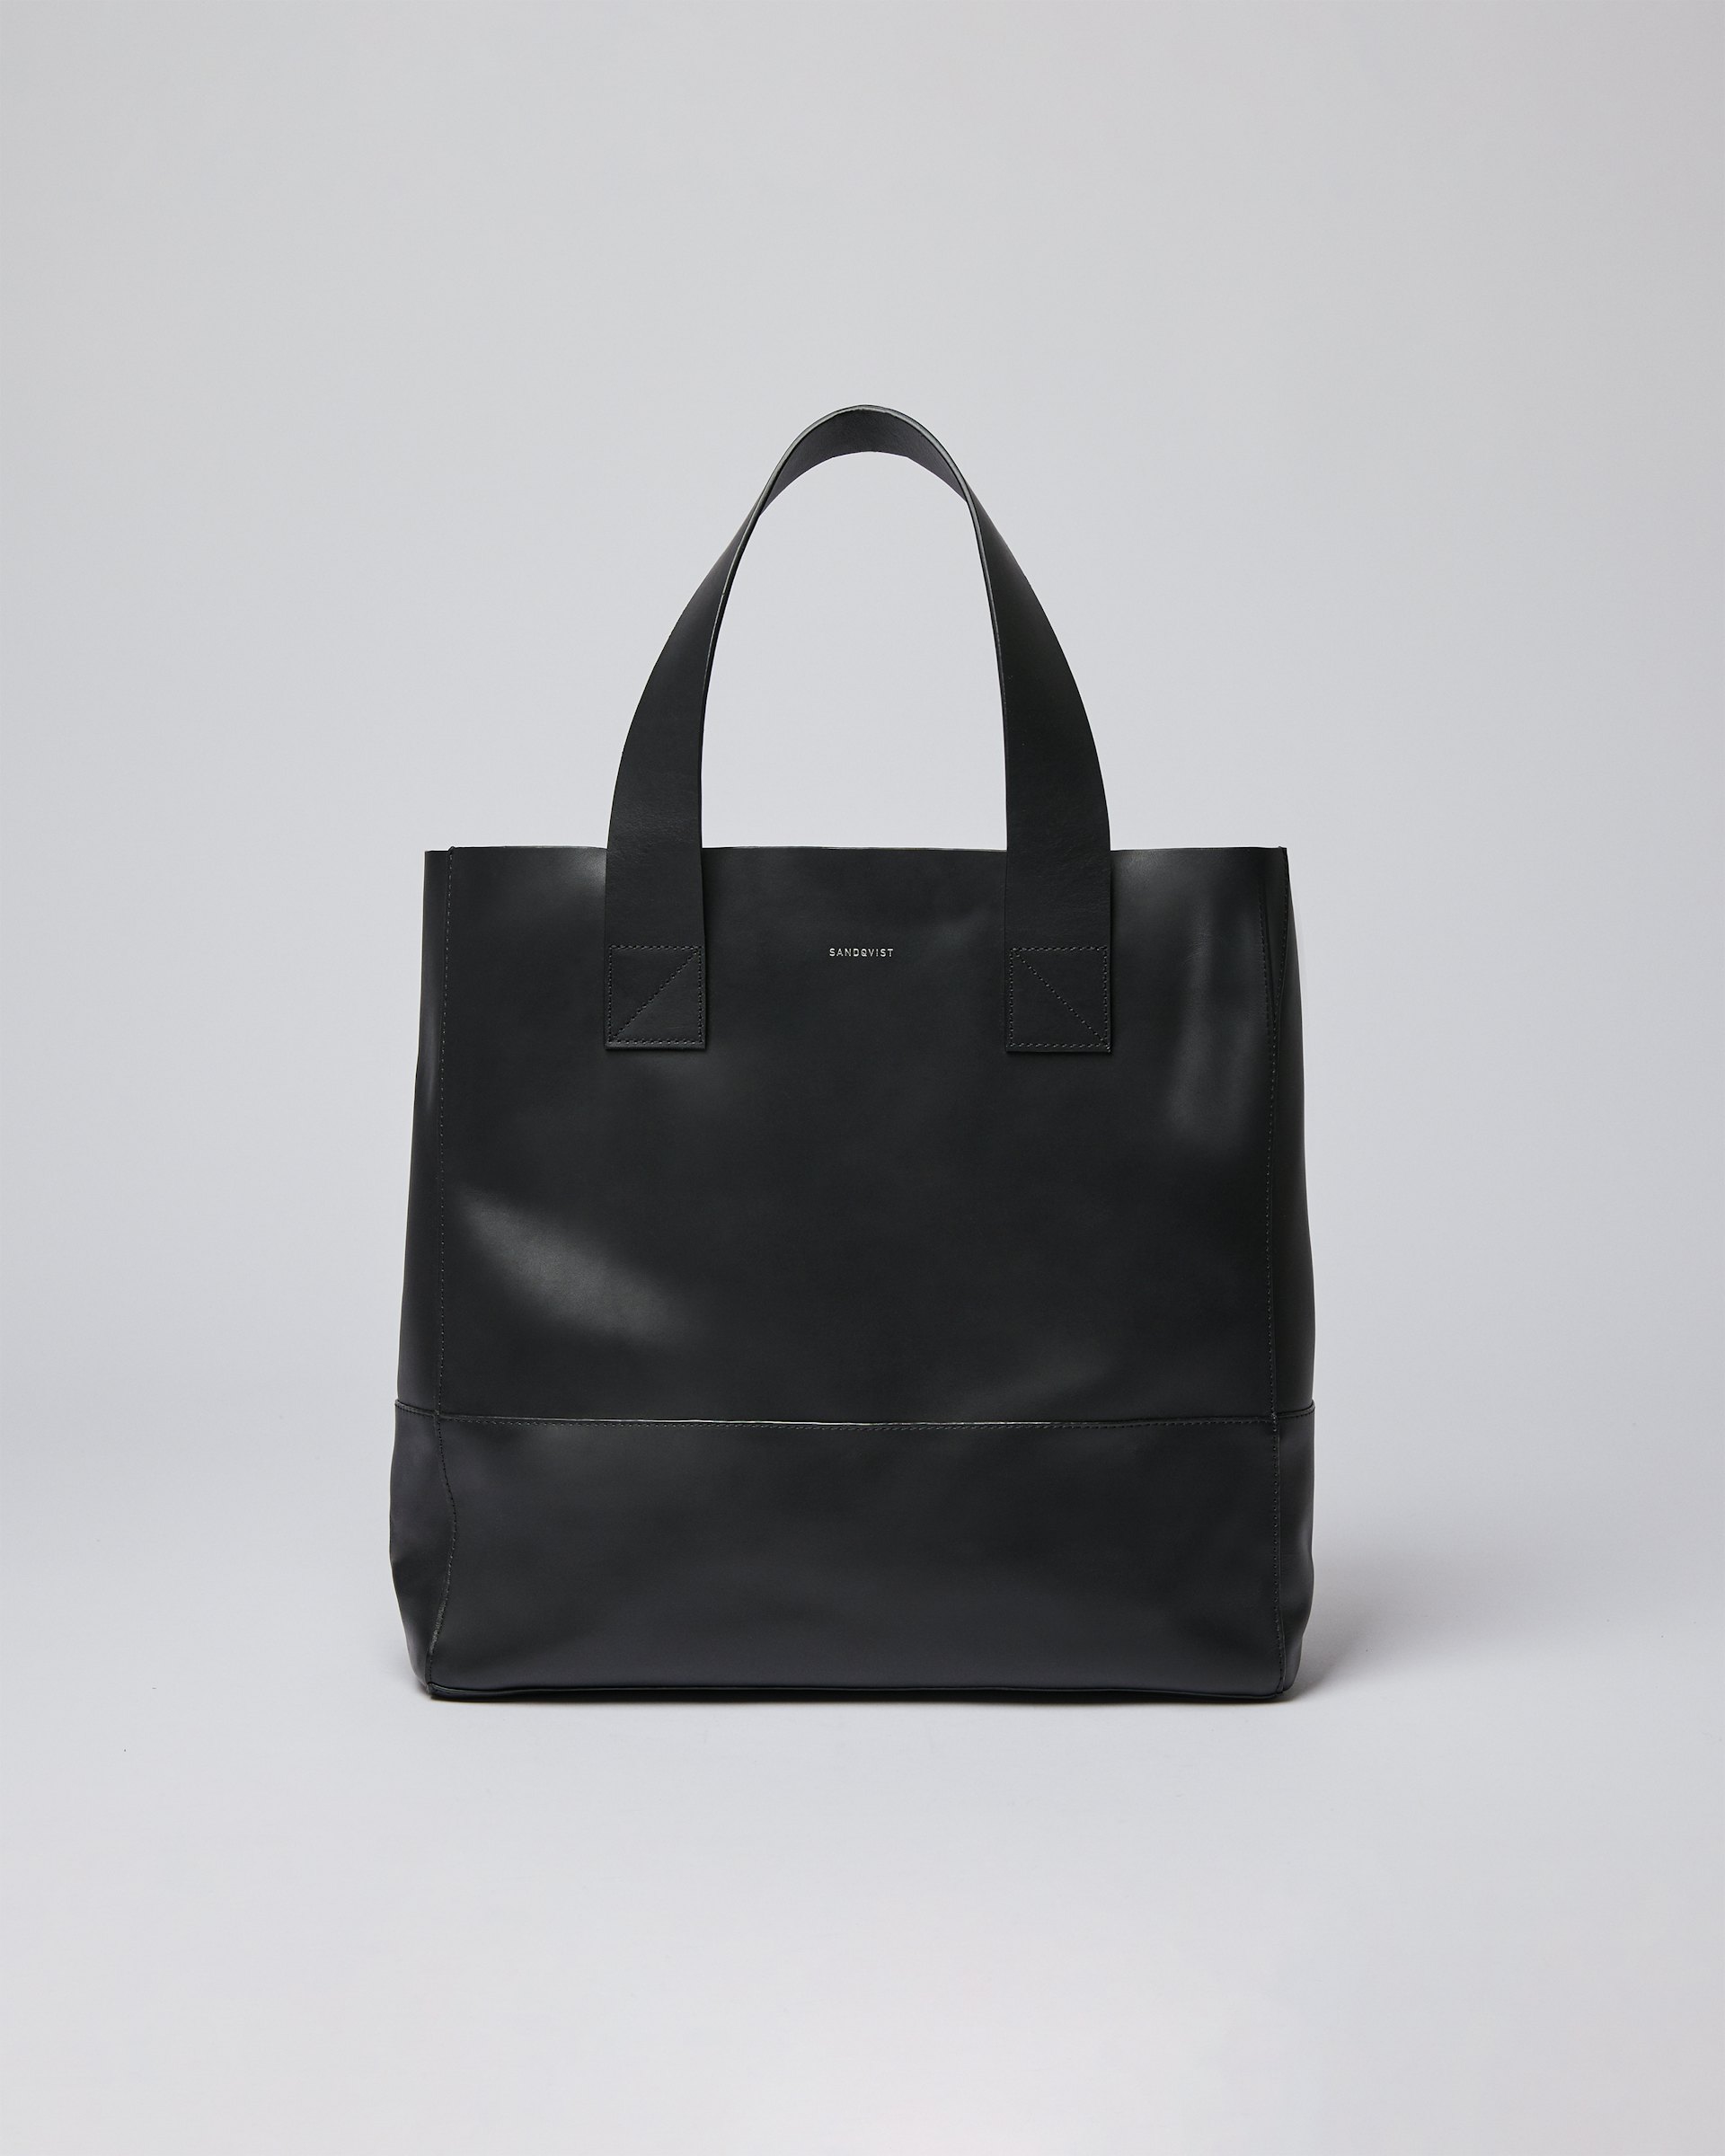 Iris belongs to the category Shoulder bags and is in color black